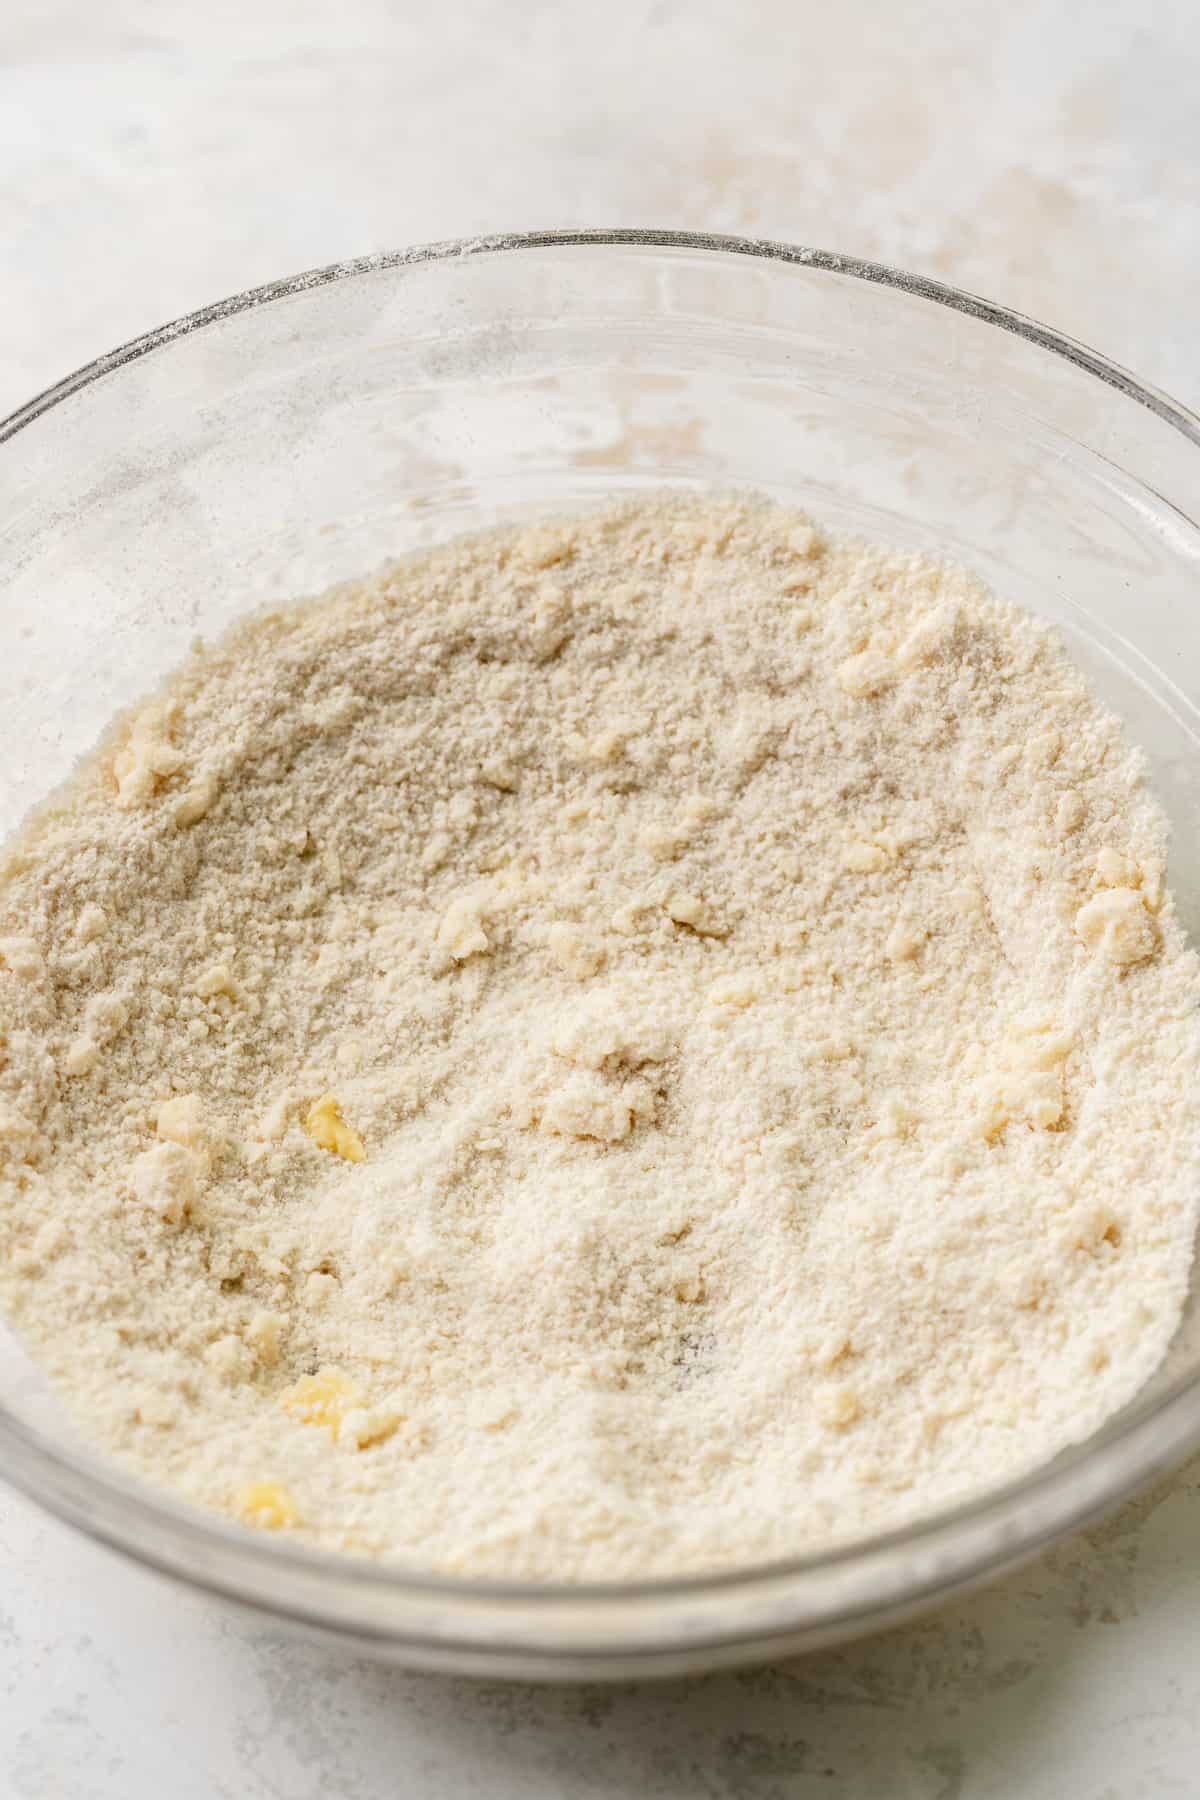 Dry ingredients to make cupcakes mixed together in a bowl.